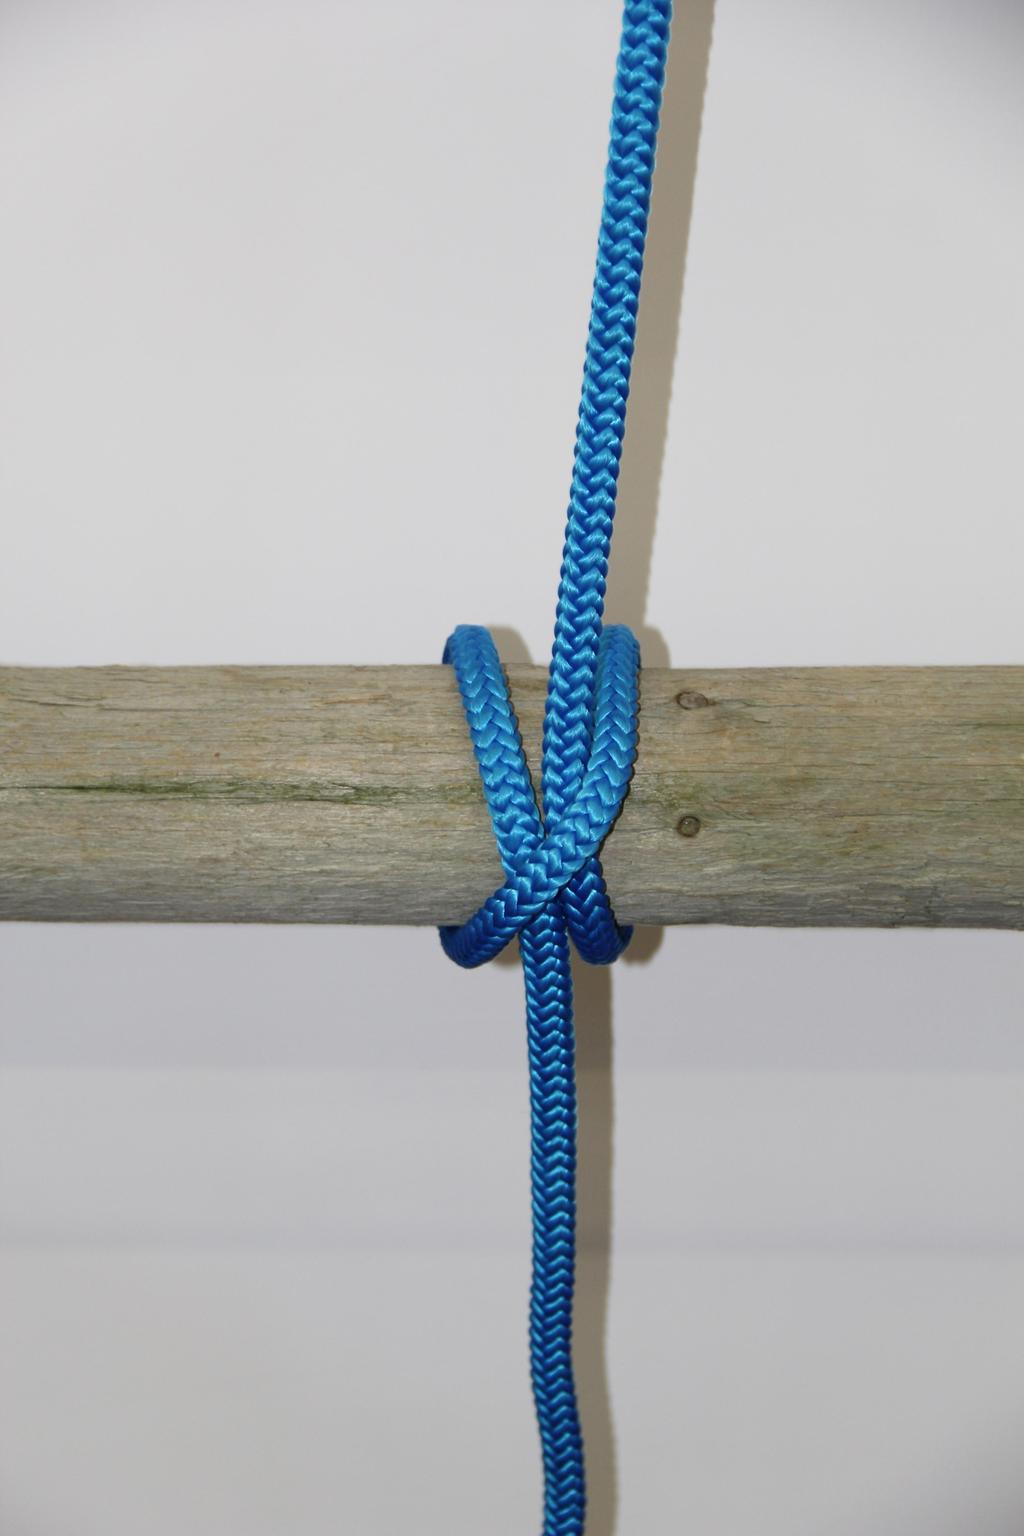 Clove hitch: primarily used to secure branches which are